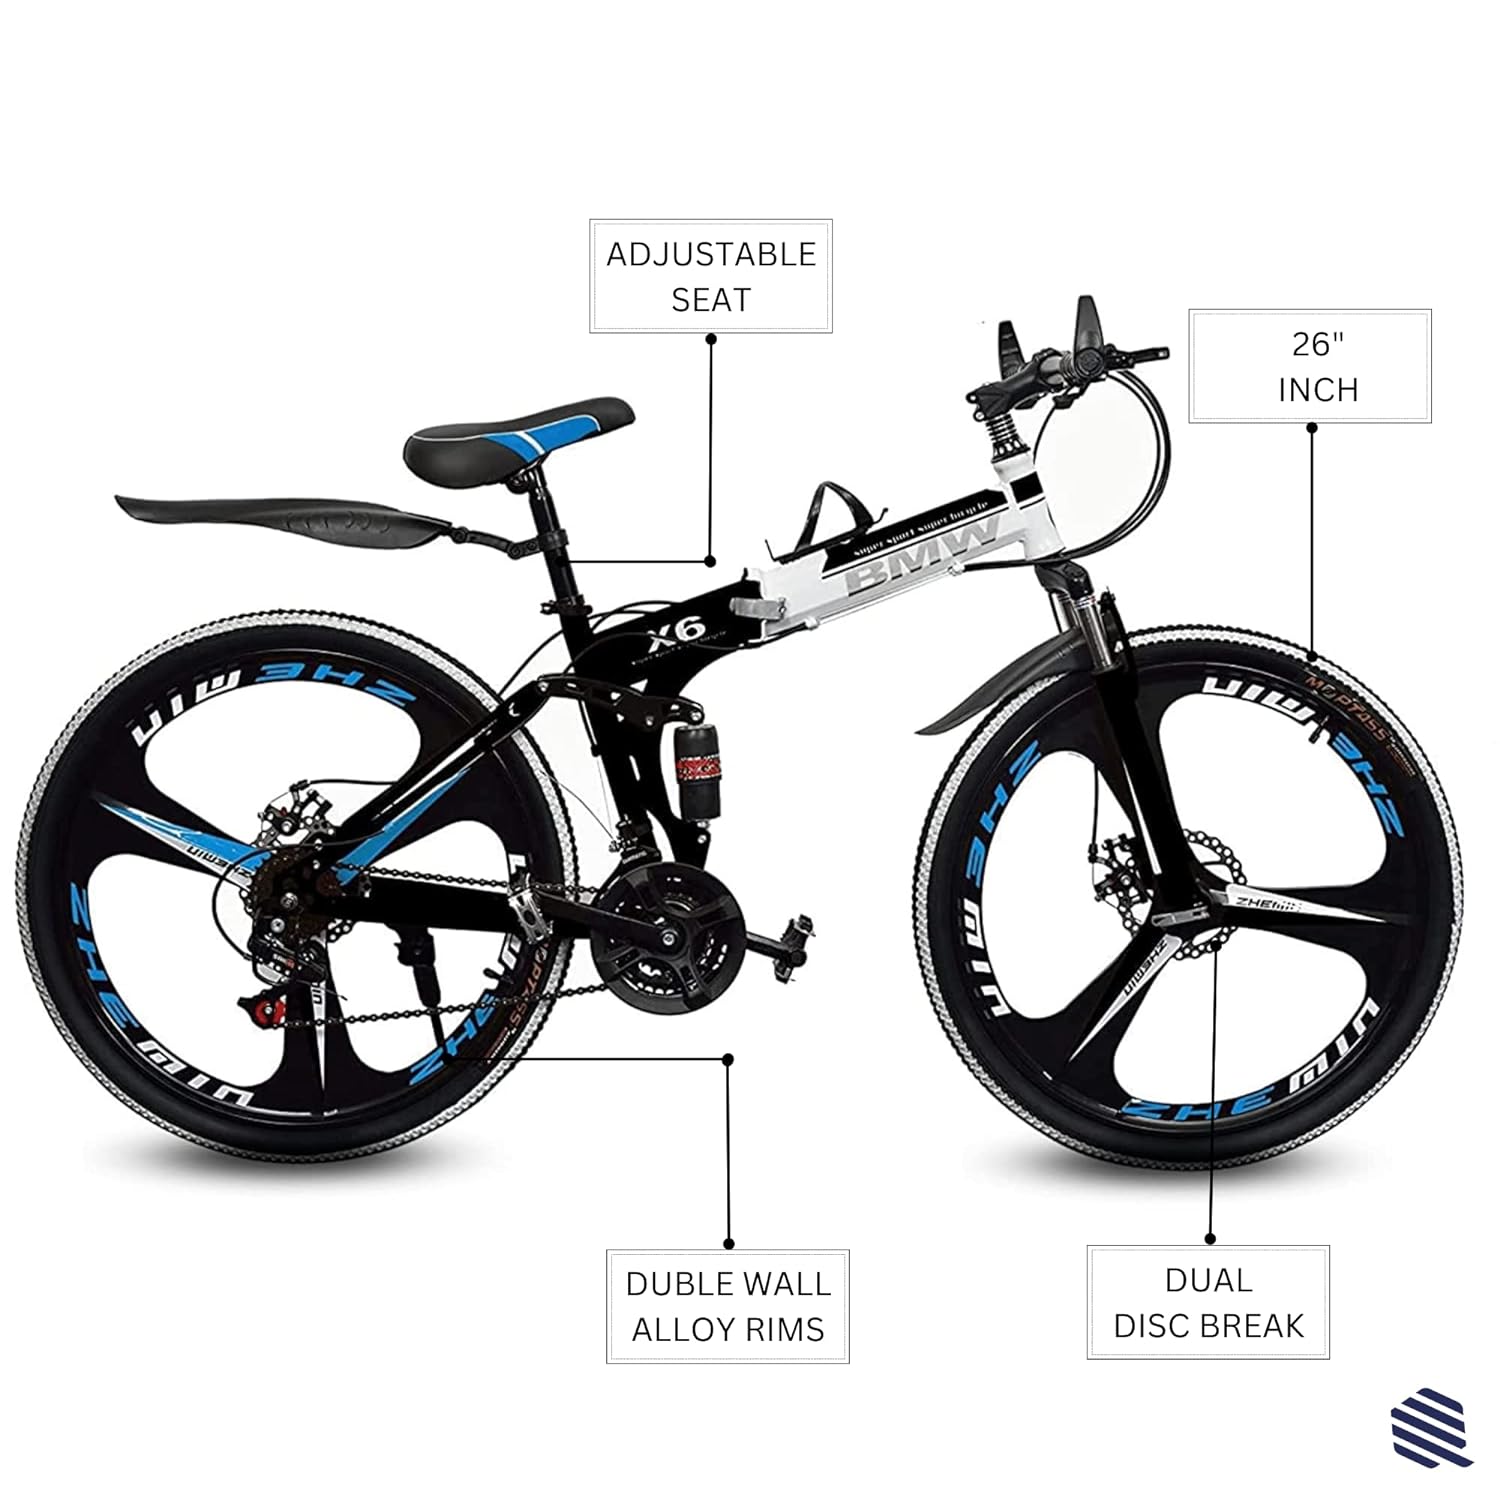 QUESEC Kai Bikes Latest BMW X6 Series, 3 Spoke Foldable/Folding MTB 21 Speed Gear Cycle for Men with Dual Disc Brake 16 Inches Steel Frame Cycle Yong and Adult Bicycle